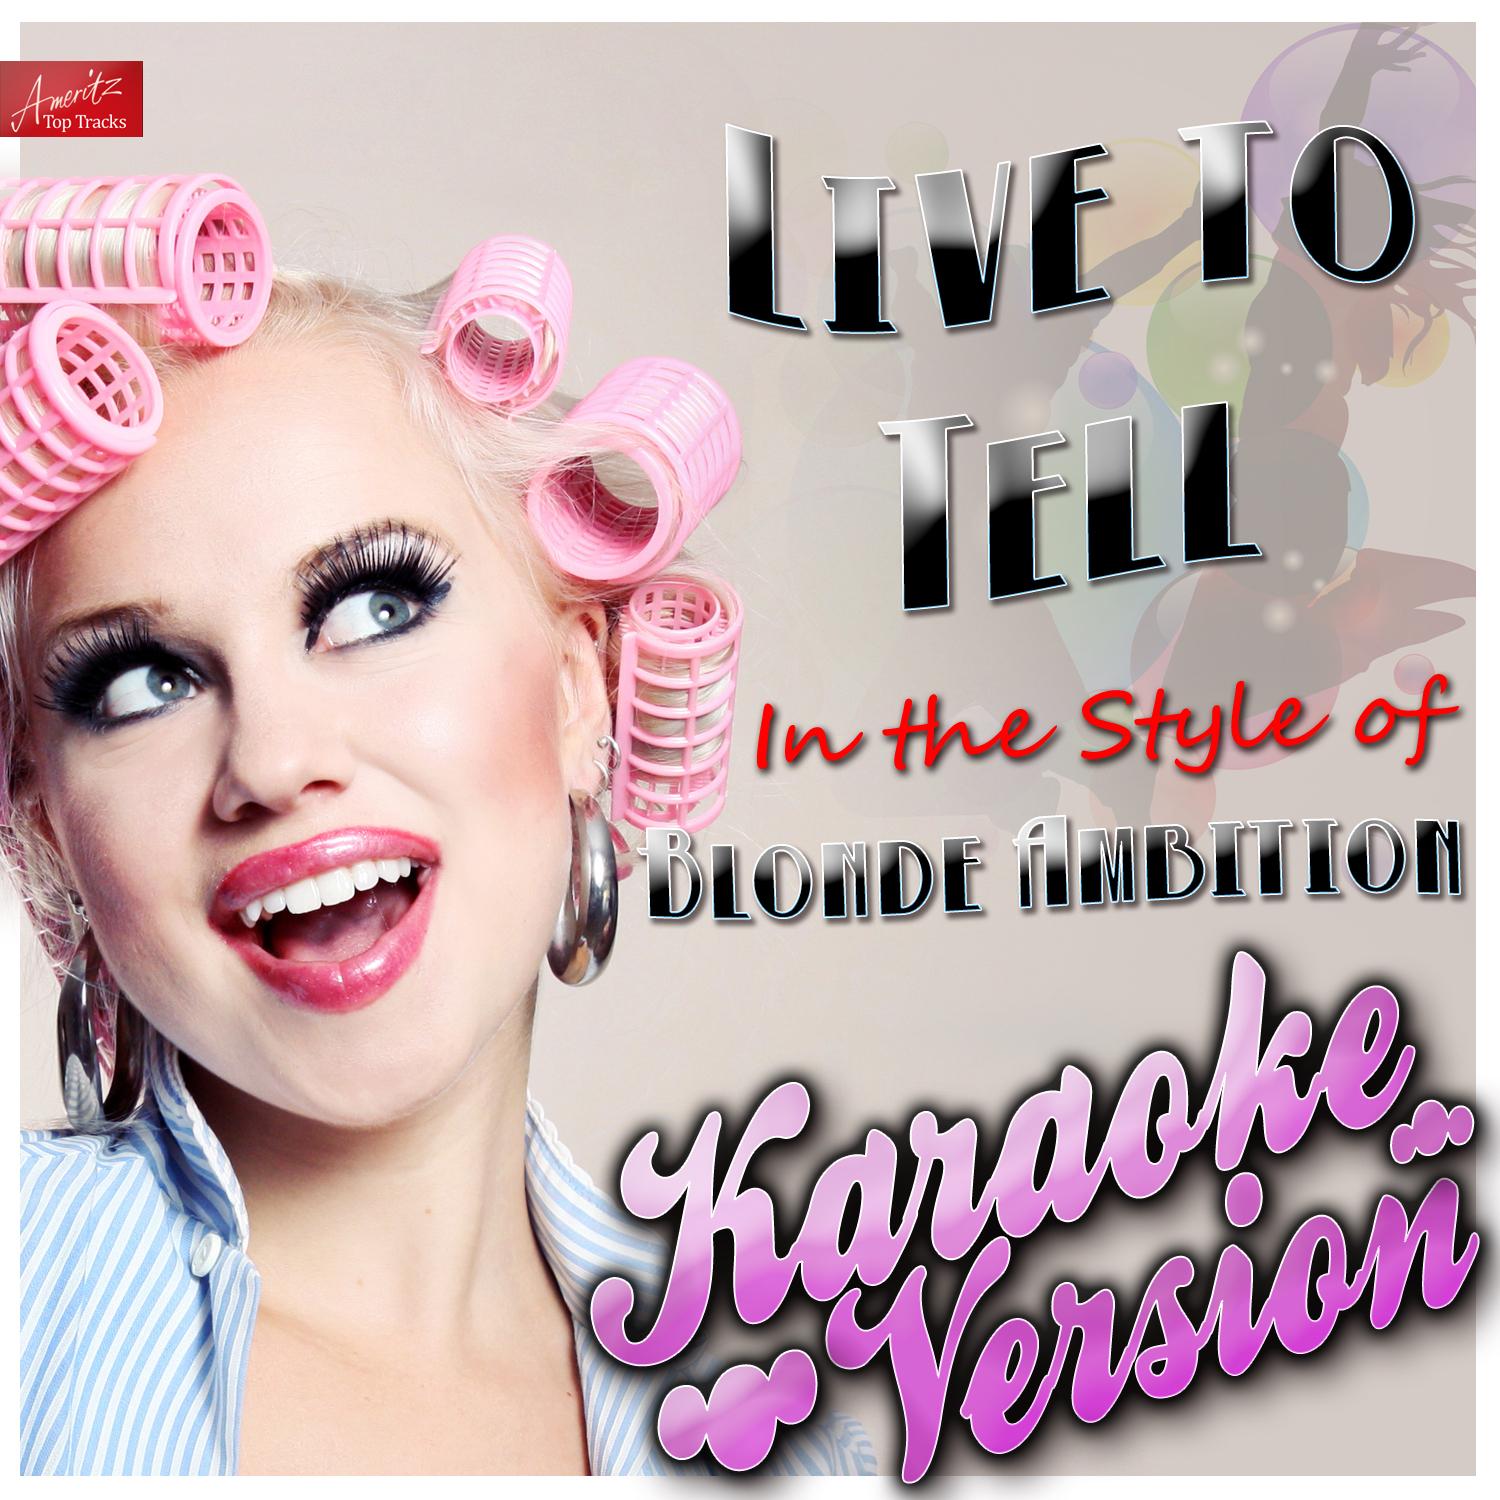 Live to Tell (In the Style of Blonde Ambition) [Karaoke Version]